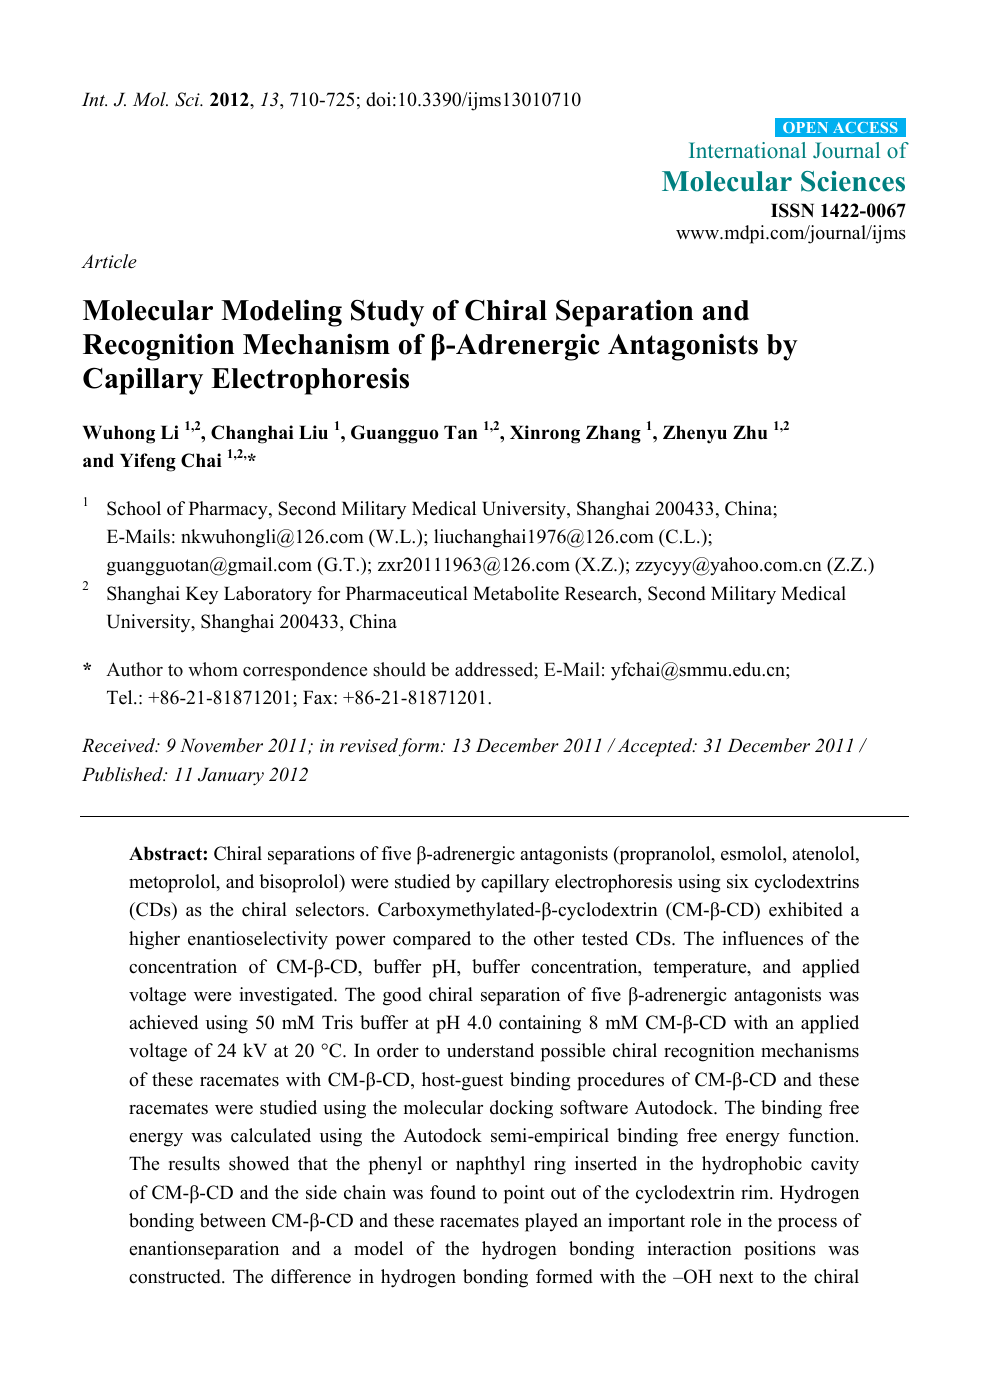 Molecular Modeling Study Of Chiral Separation And Recognition Mechanism Of B Adrenergic Antagonists By Capillary Electrophoresis Topic Of Research Paper In Chemical Sciences Download Scholarly Article Pdf And Read For Free On